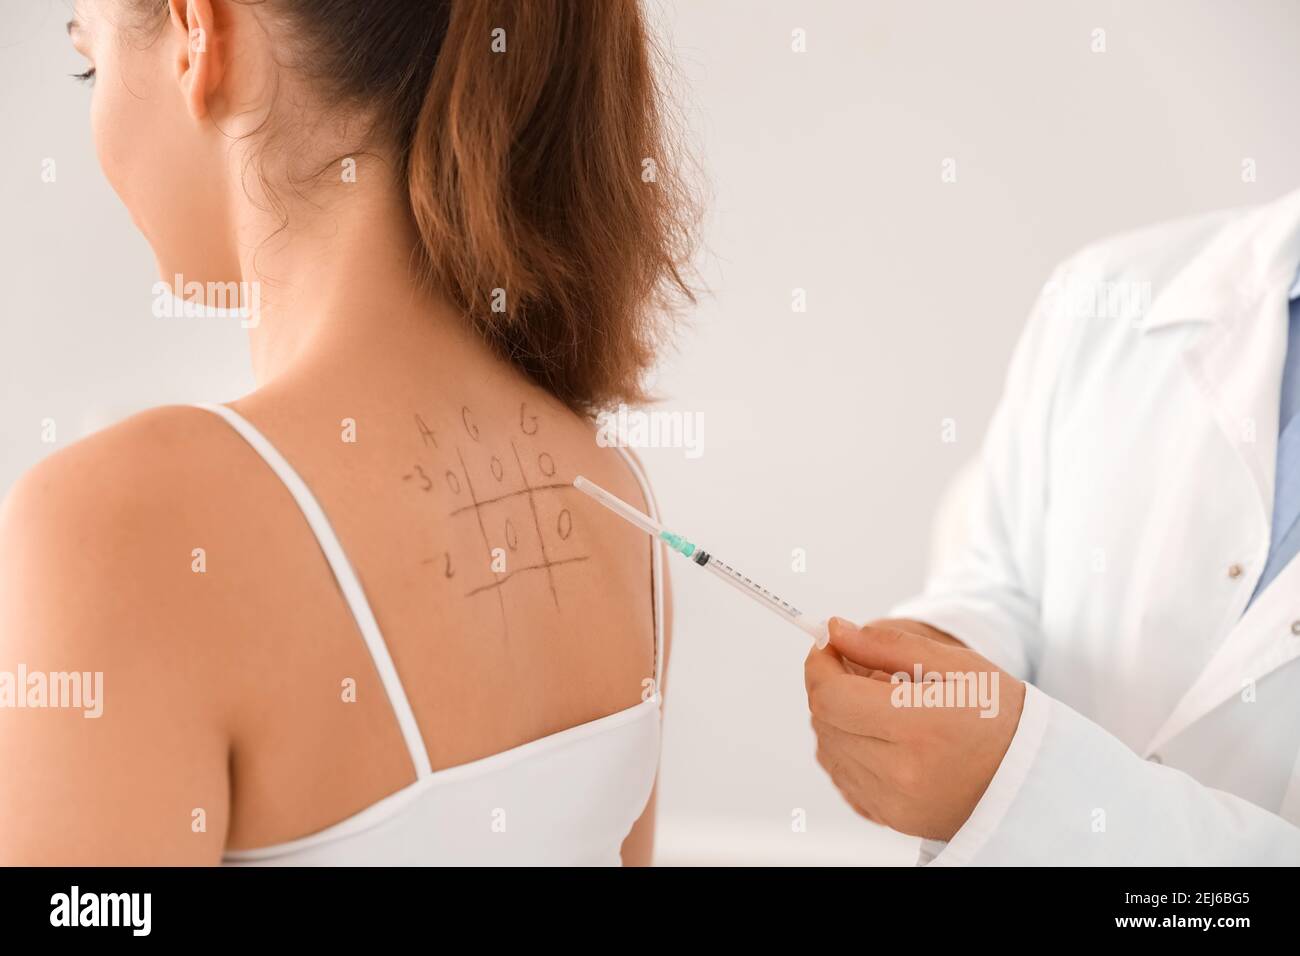 Patch tests stuck on the back of a woman, Tests for skin allergens